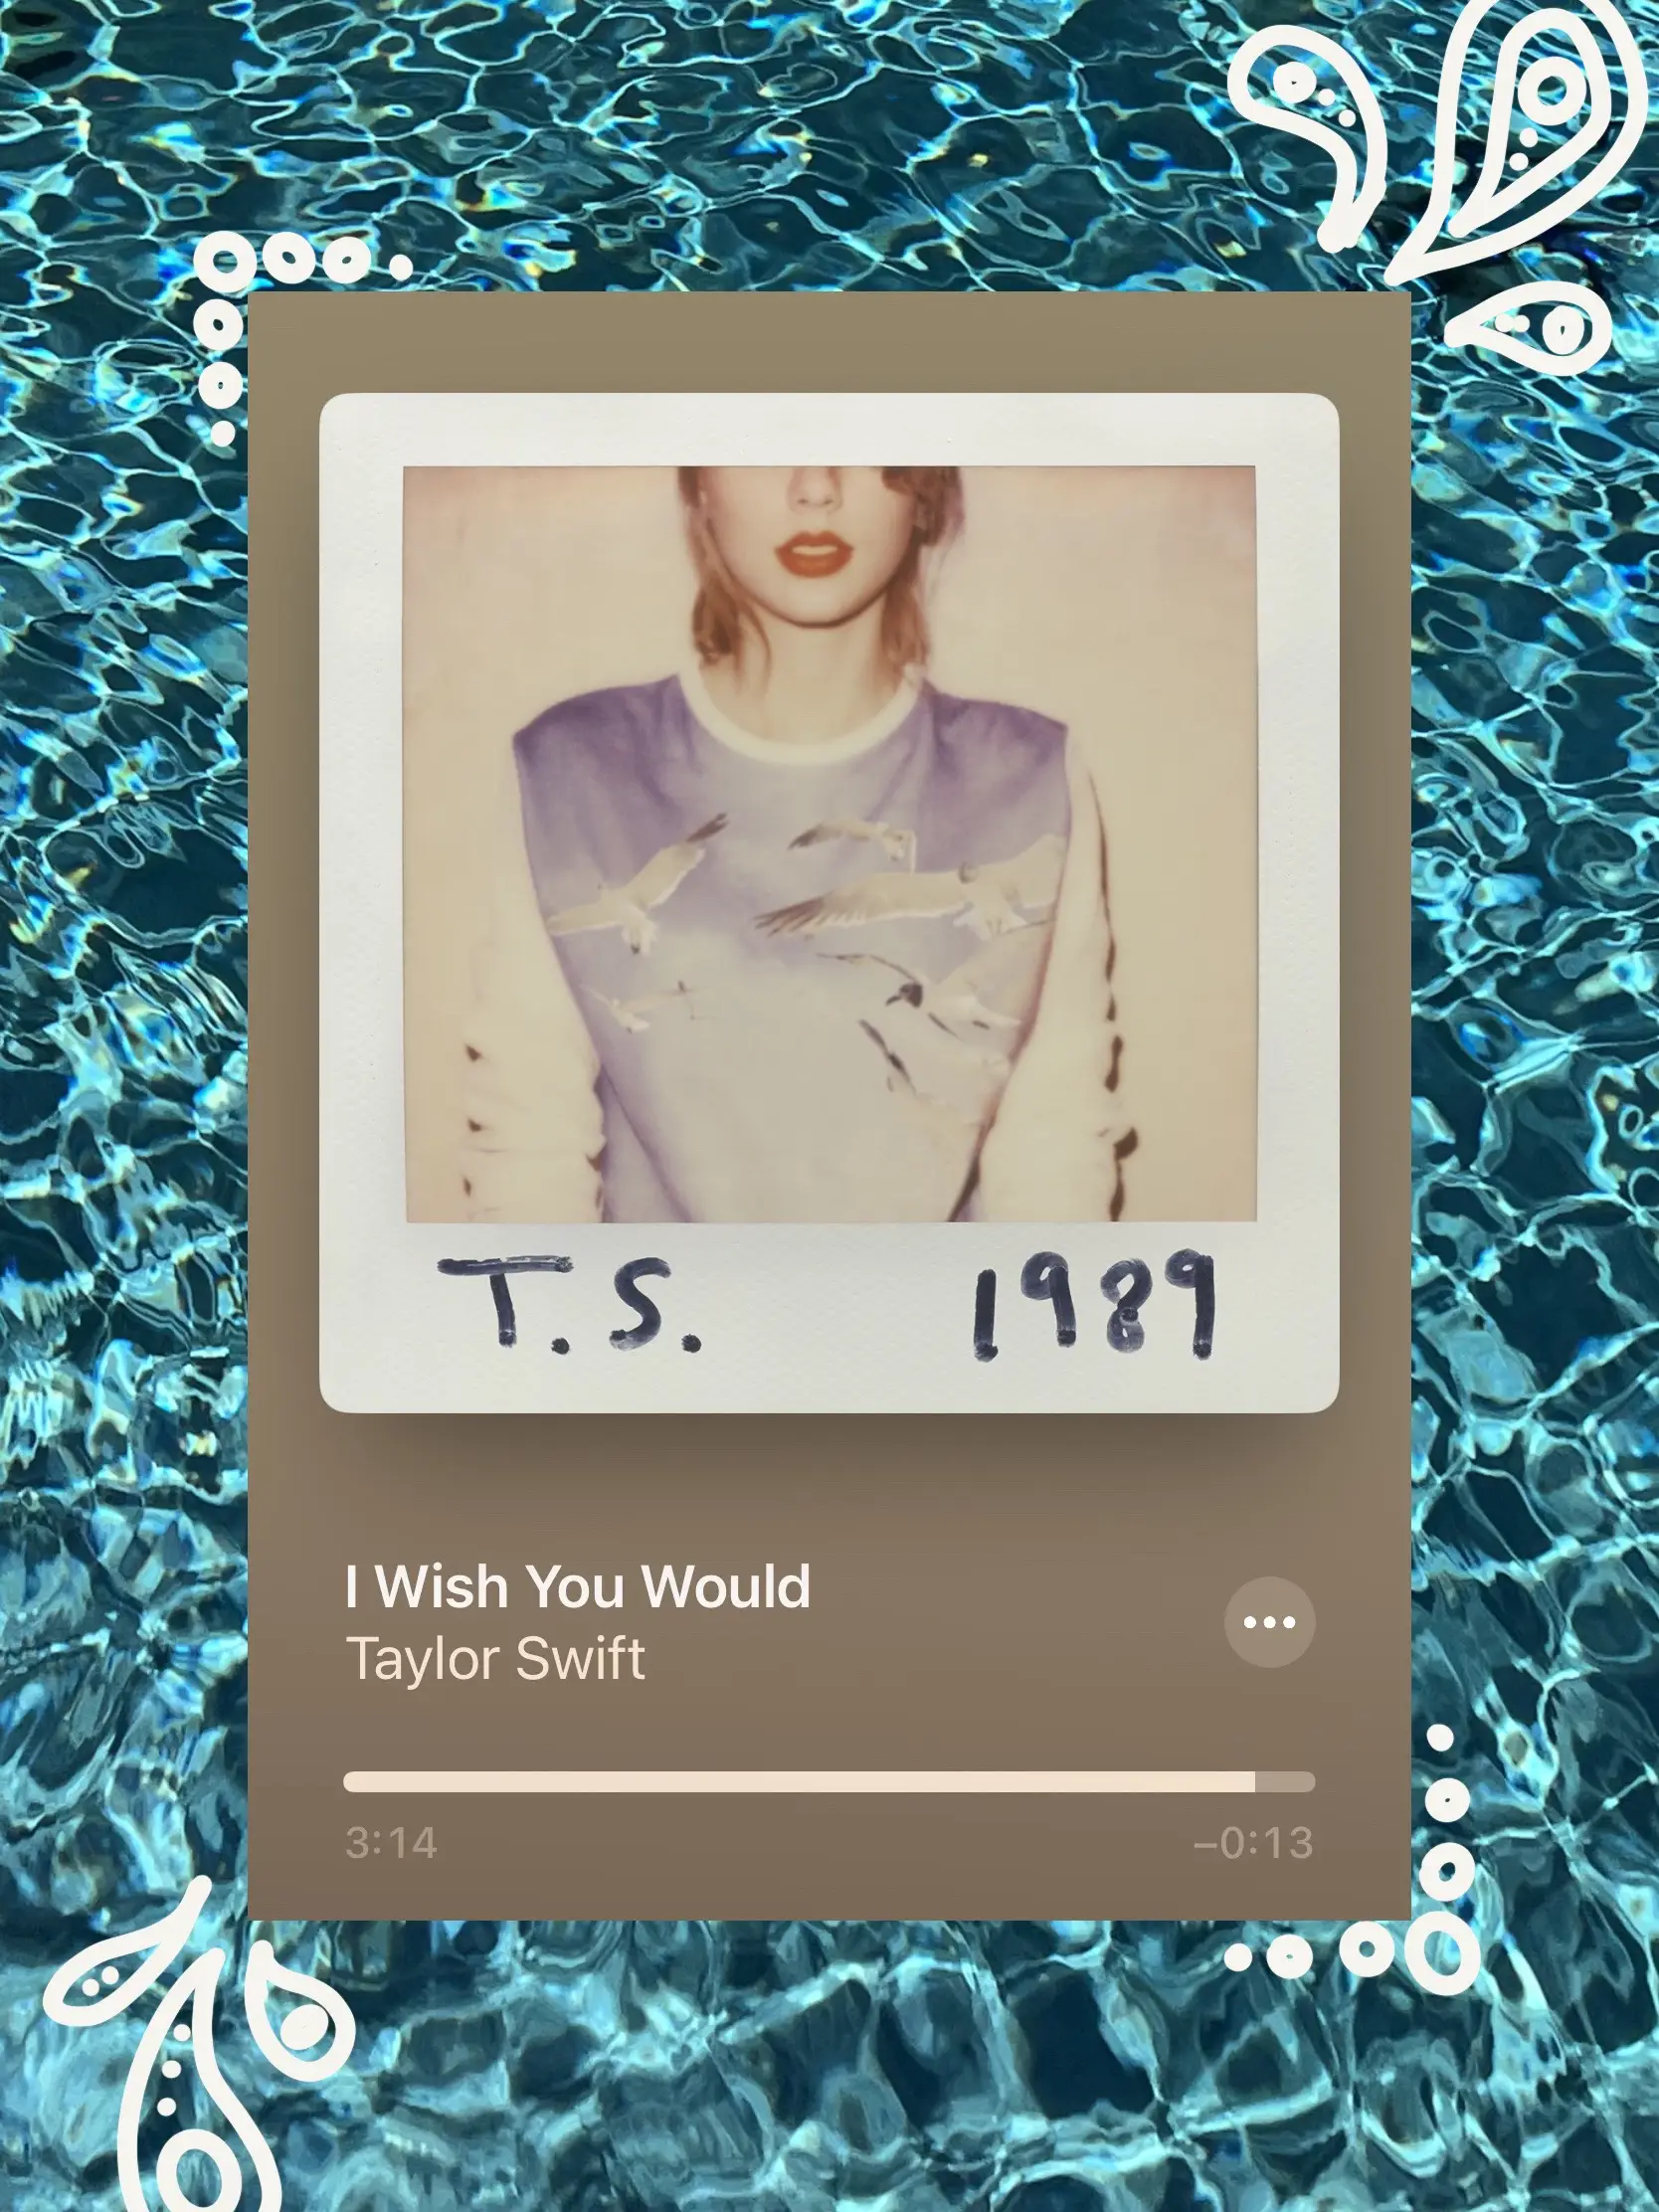  A picture of Taylor Swift with the words "I wish you would" written underneath it.